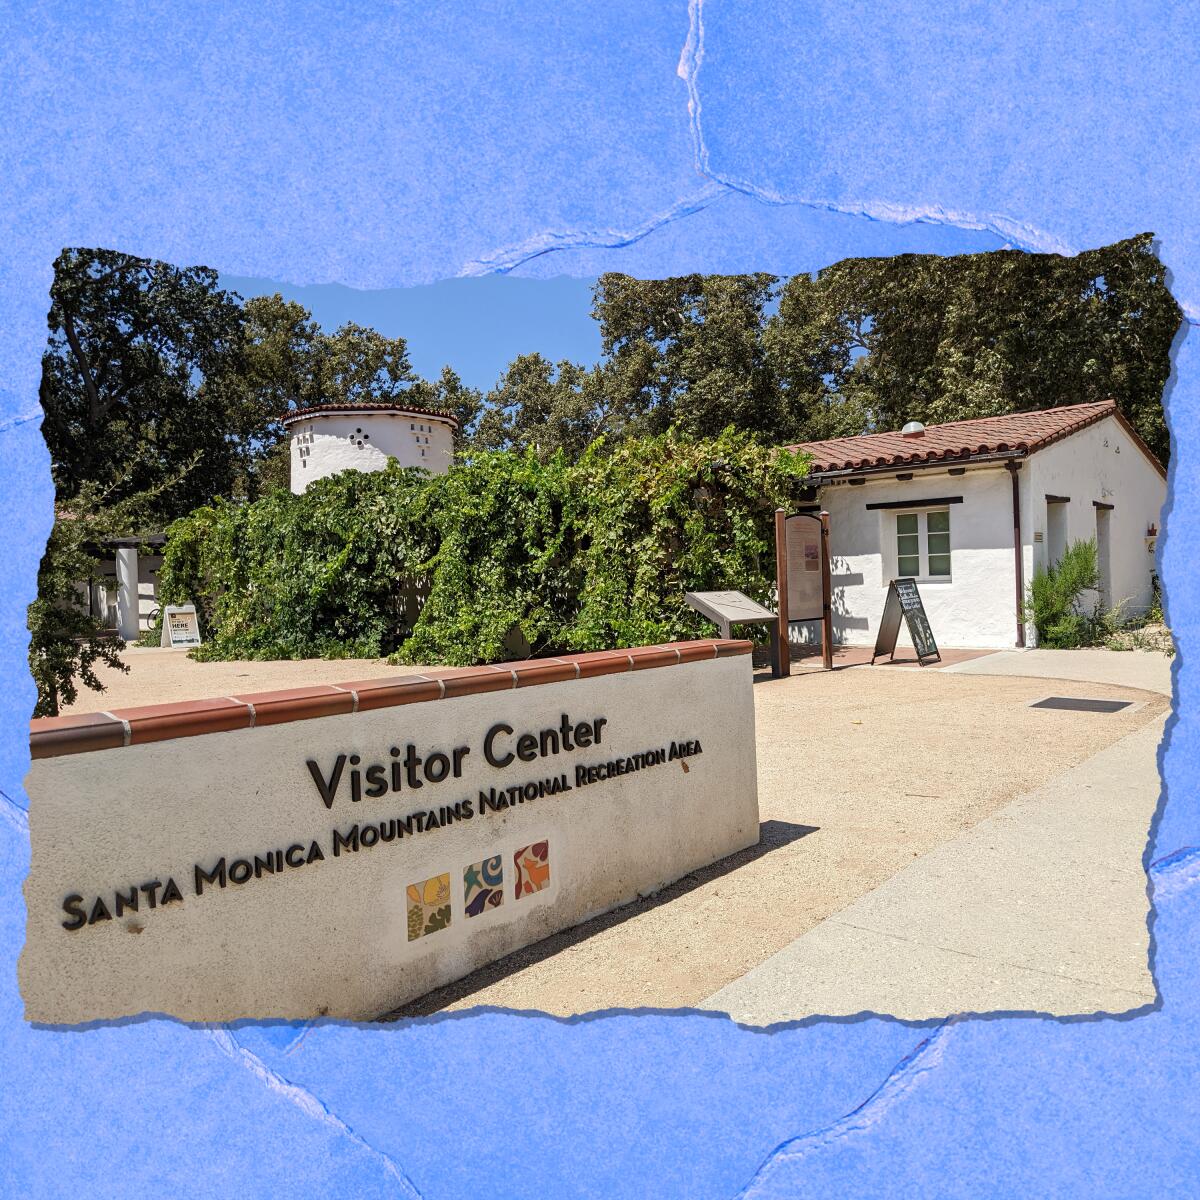 A wall near a small tile-roofed building reads "Visitor Center, Santa Monica Mountains National Recreation Area."